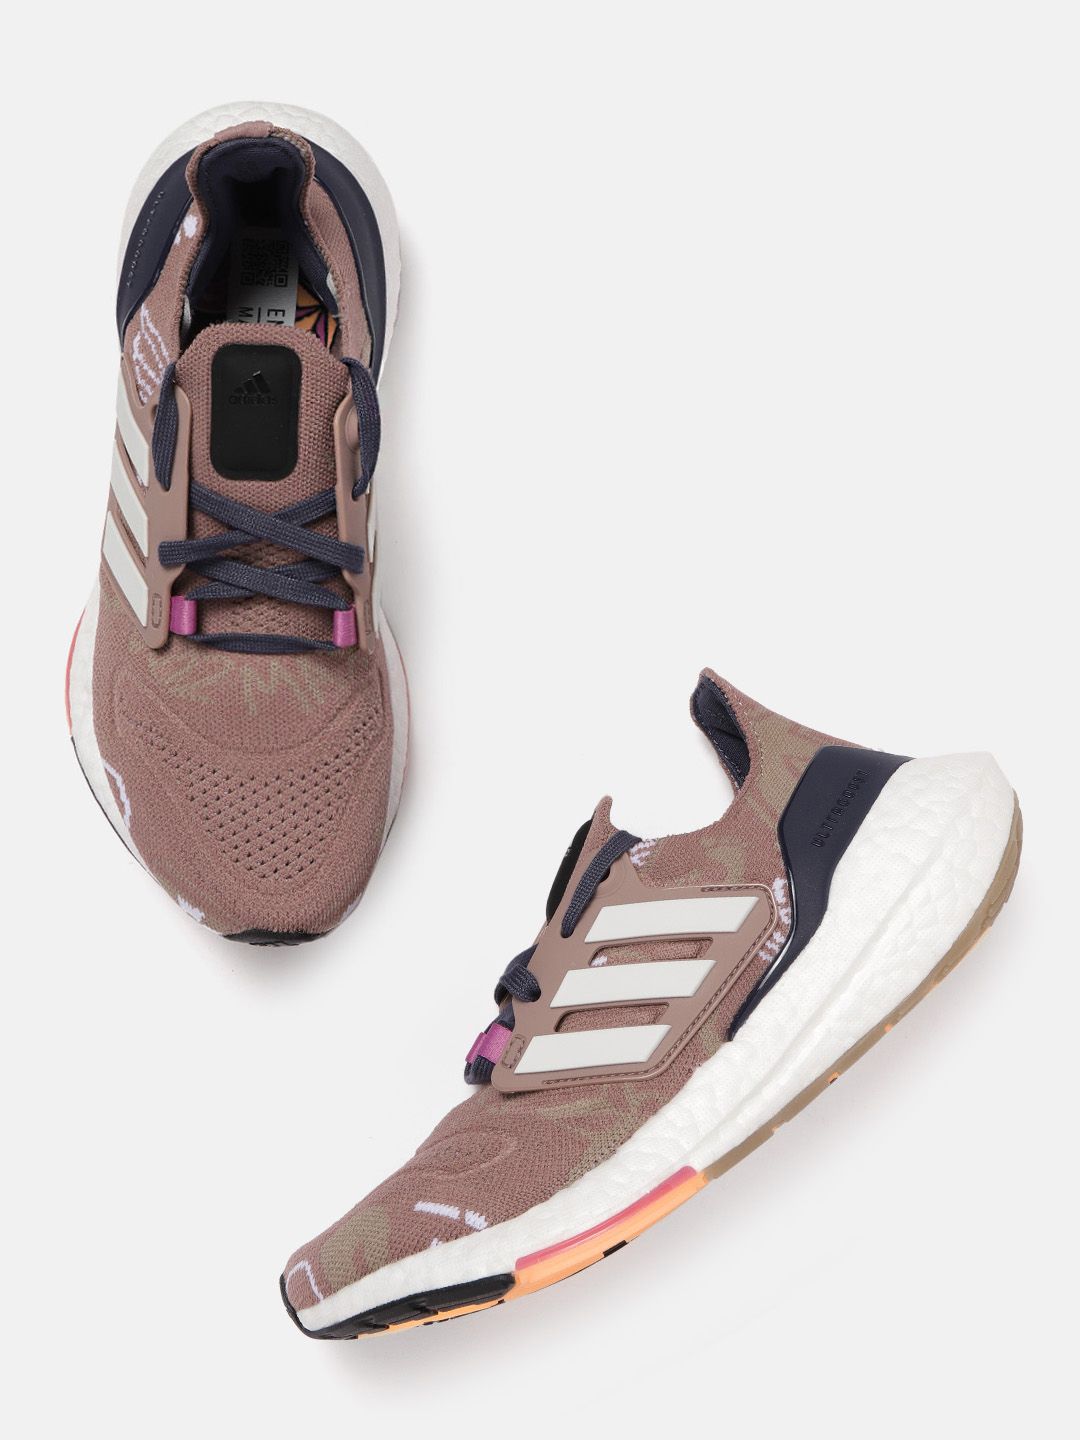 ADIDAS Women Rose Woven Design Textile Ultraboost 22 Running Shoes Price in India